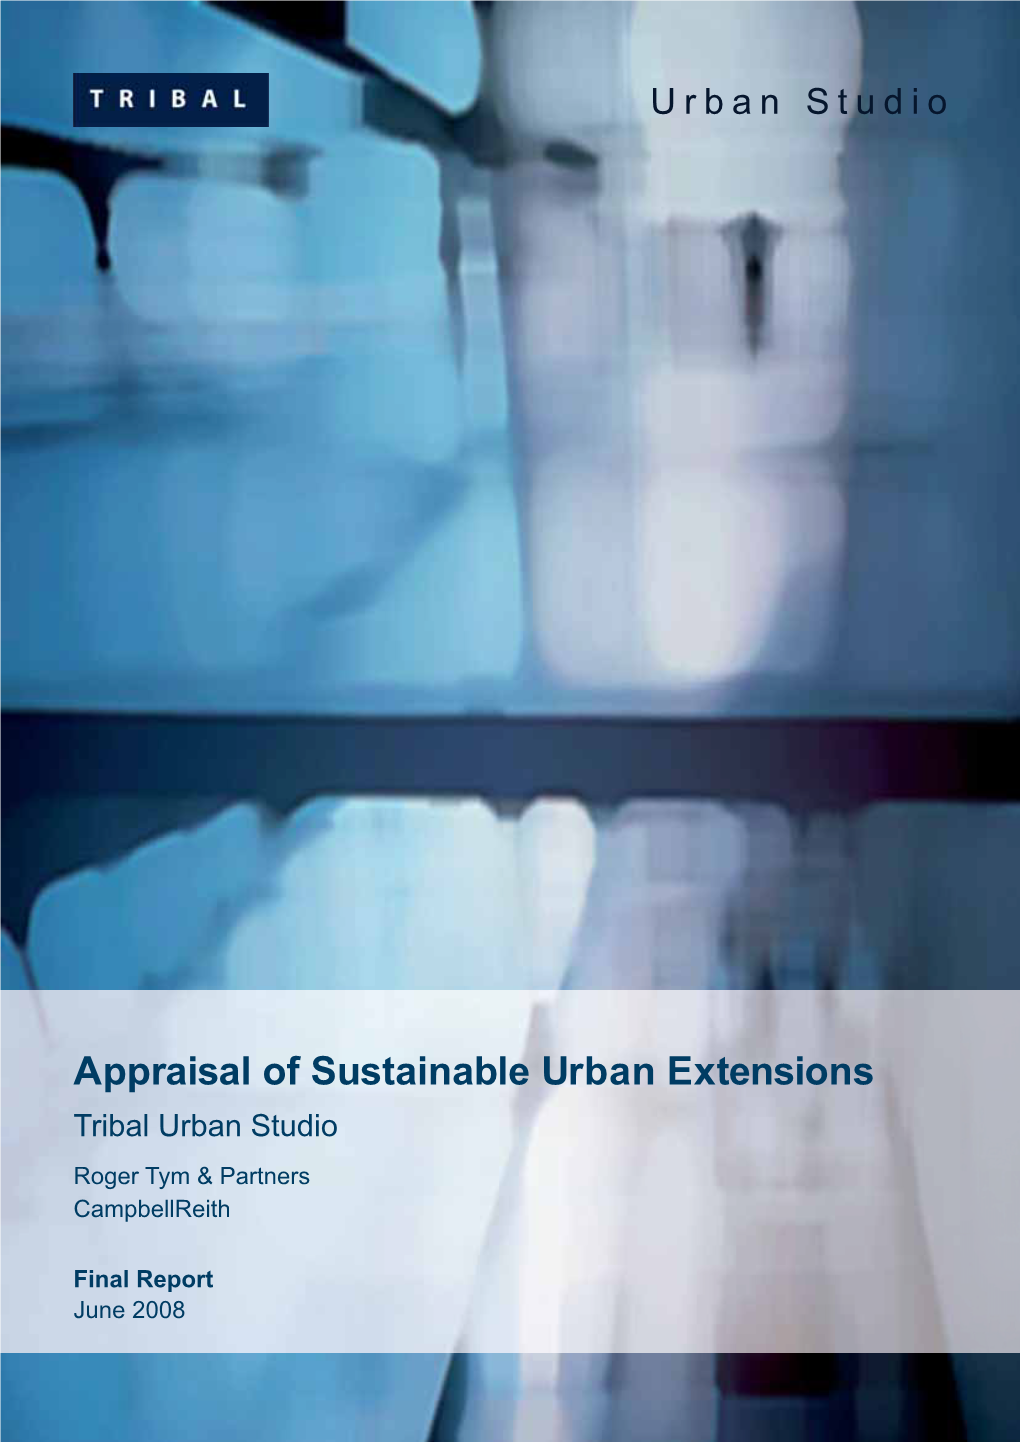 Appraisal of Sustainable Urban Extensions Tribal Urban Studio Roger Tym & Partners Campbellreith